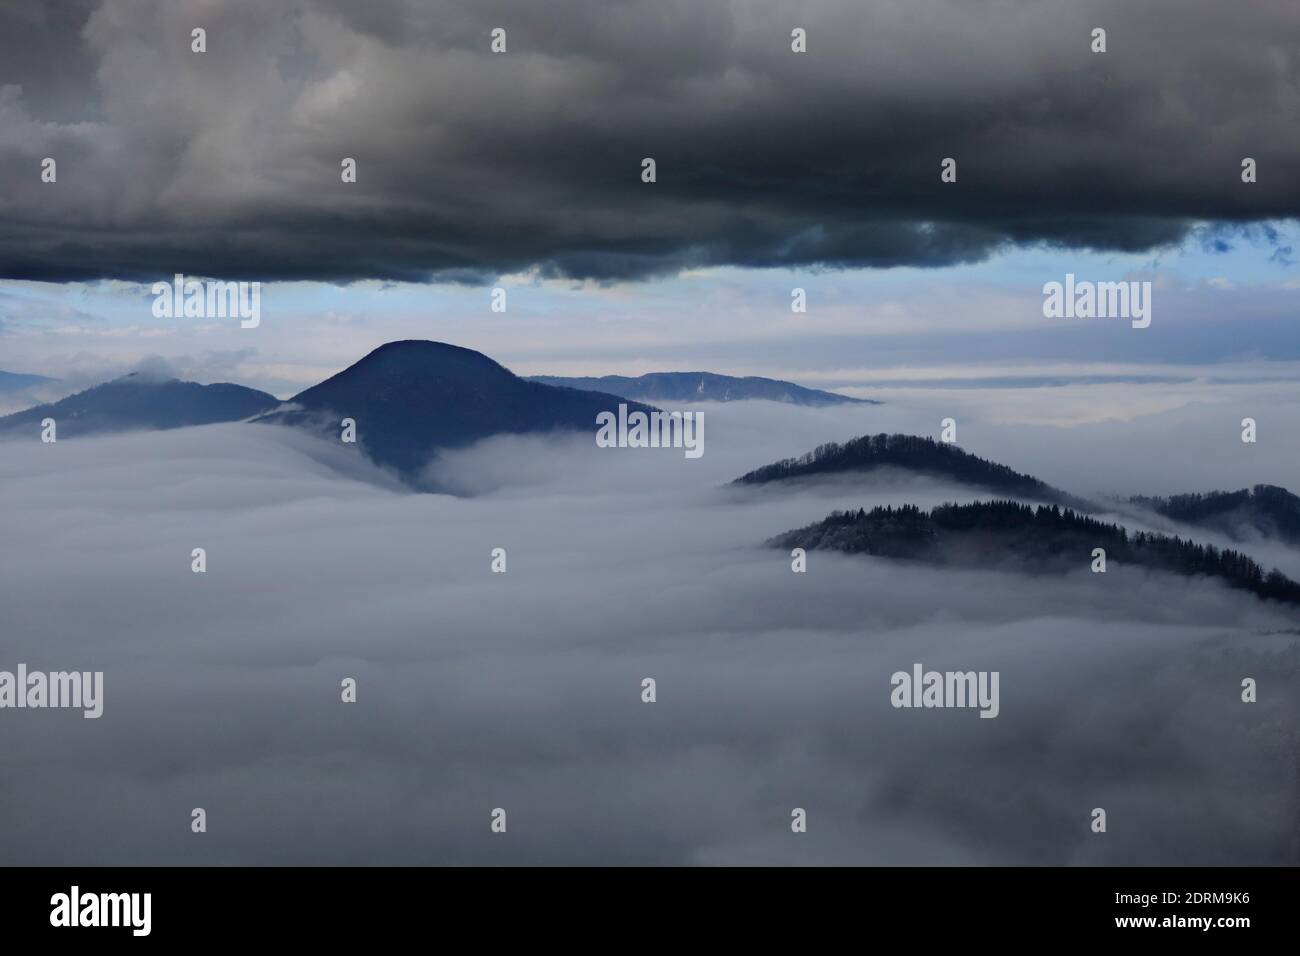 Mountain peaks visible above dense fog with heavy clouds above. Stock Photo